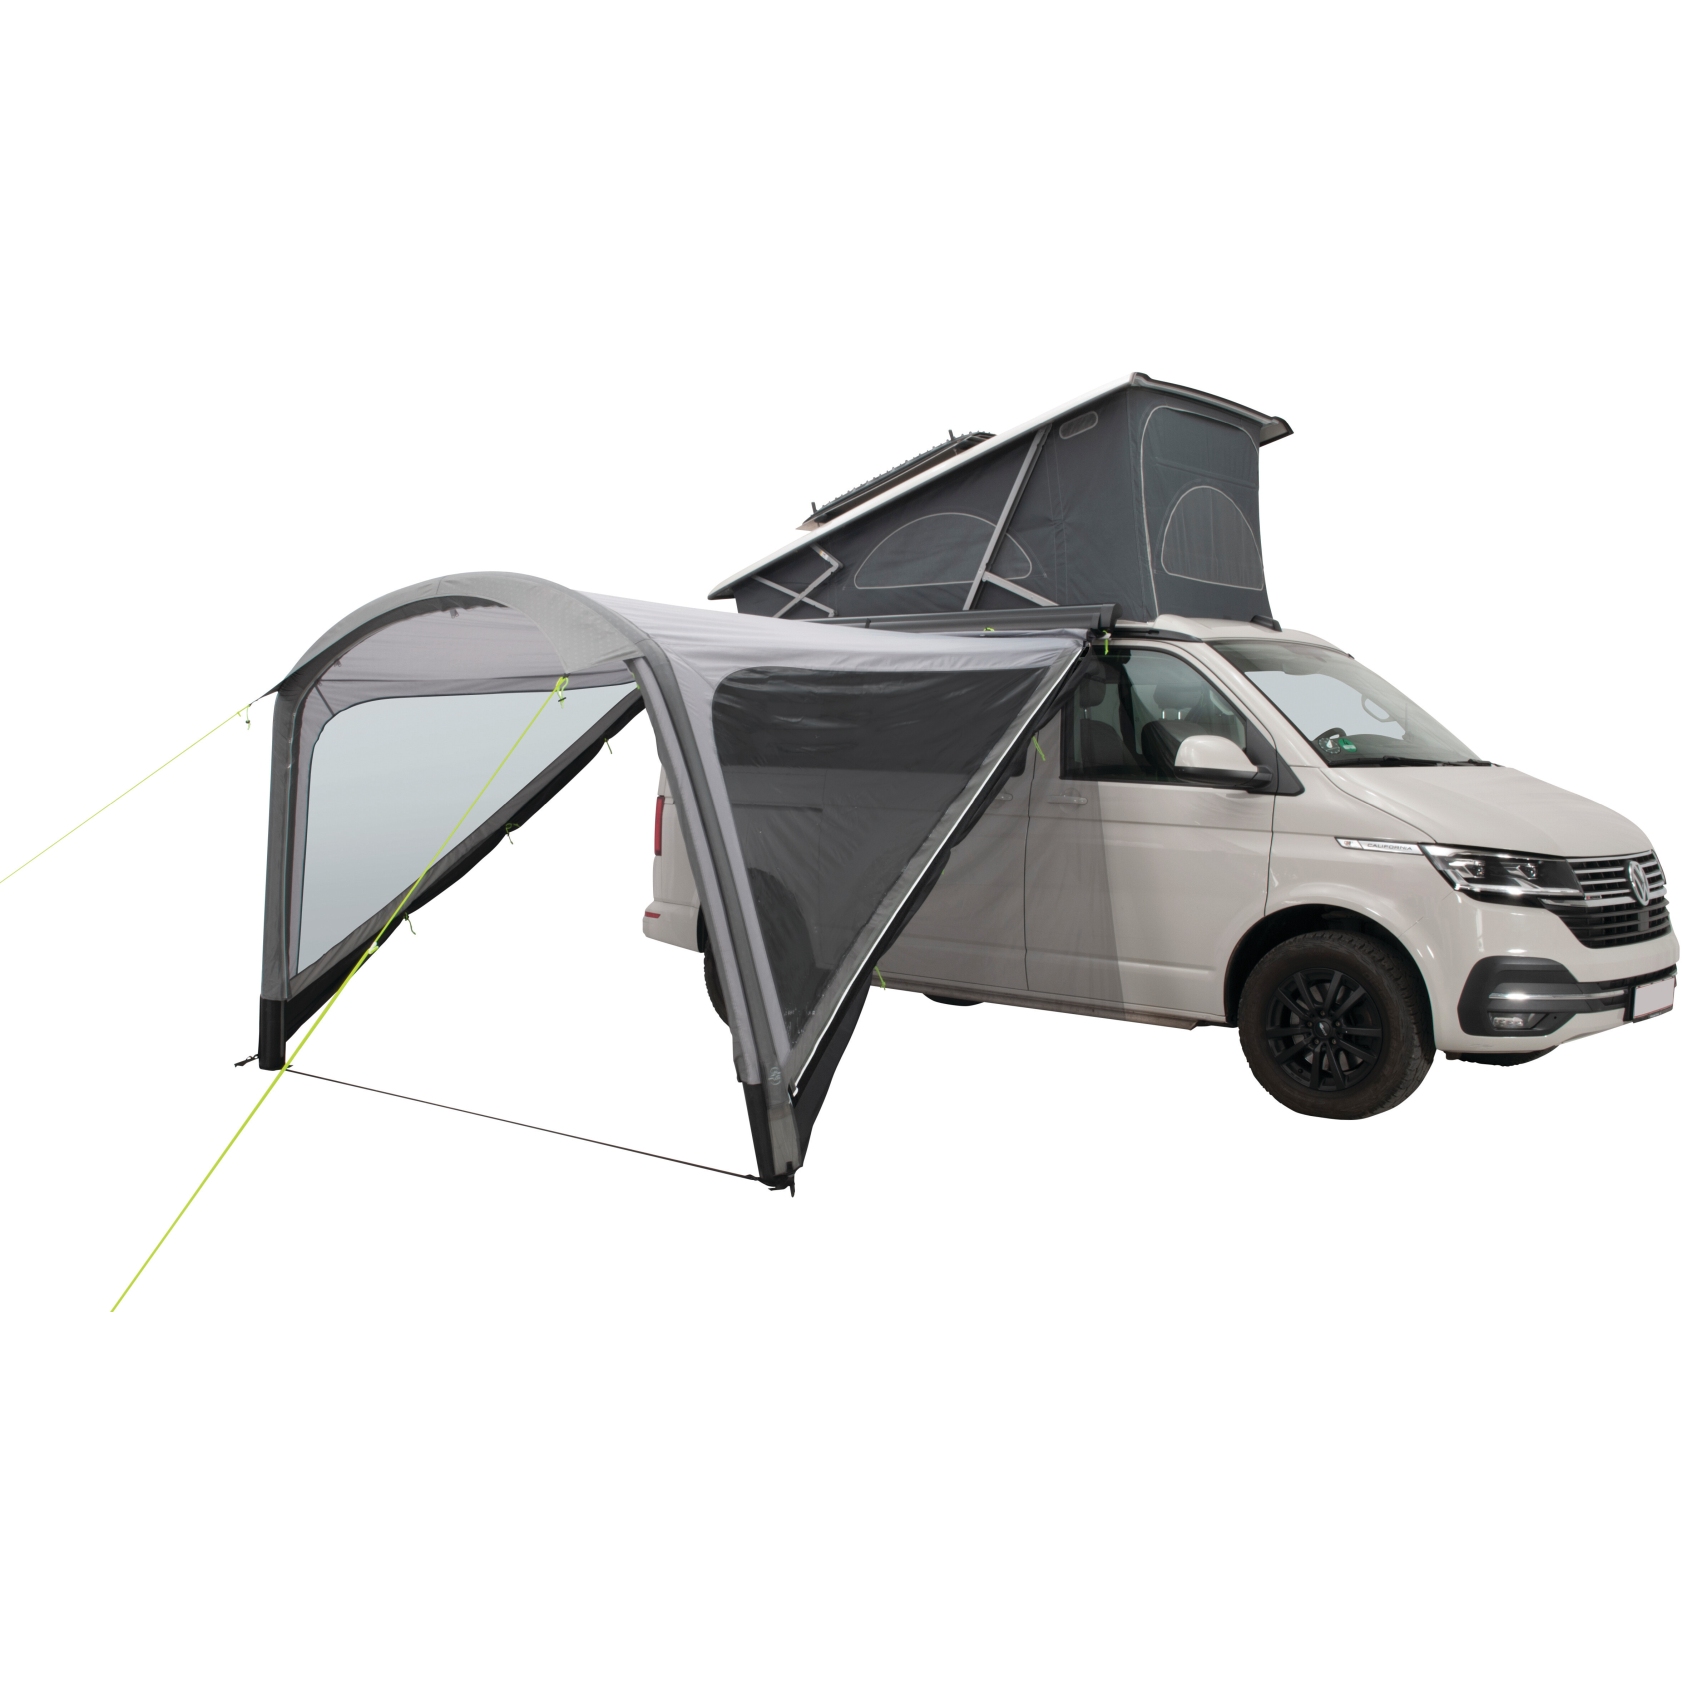 Outwell Avance Camping - Touring Shelter Air - Negro / Gris